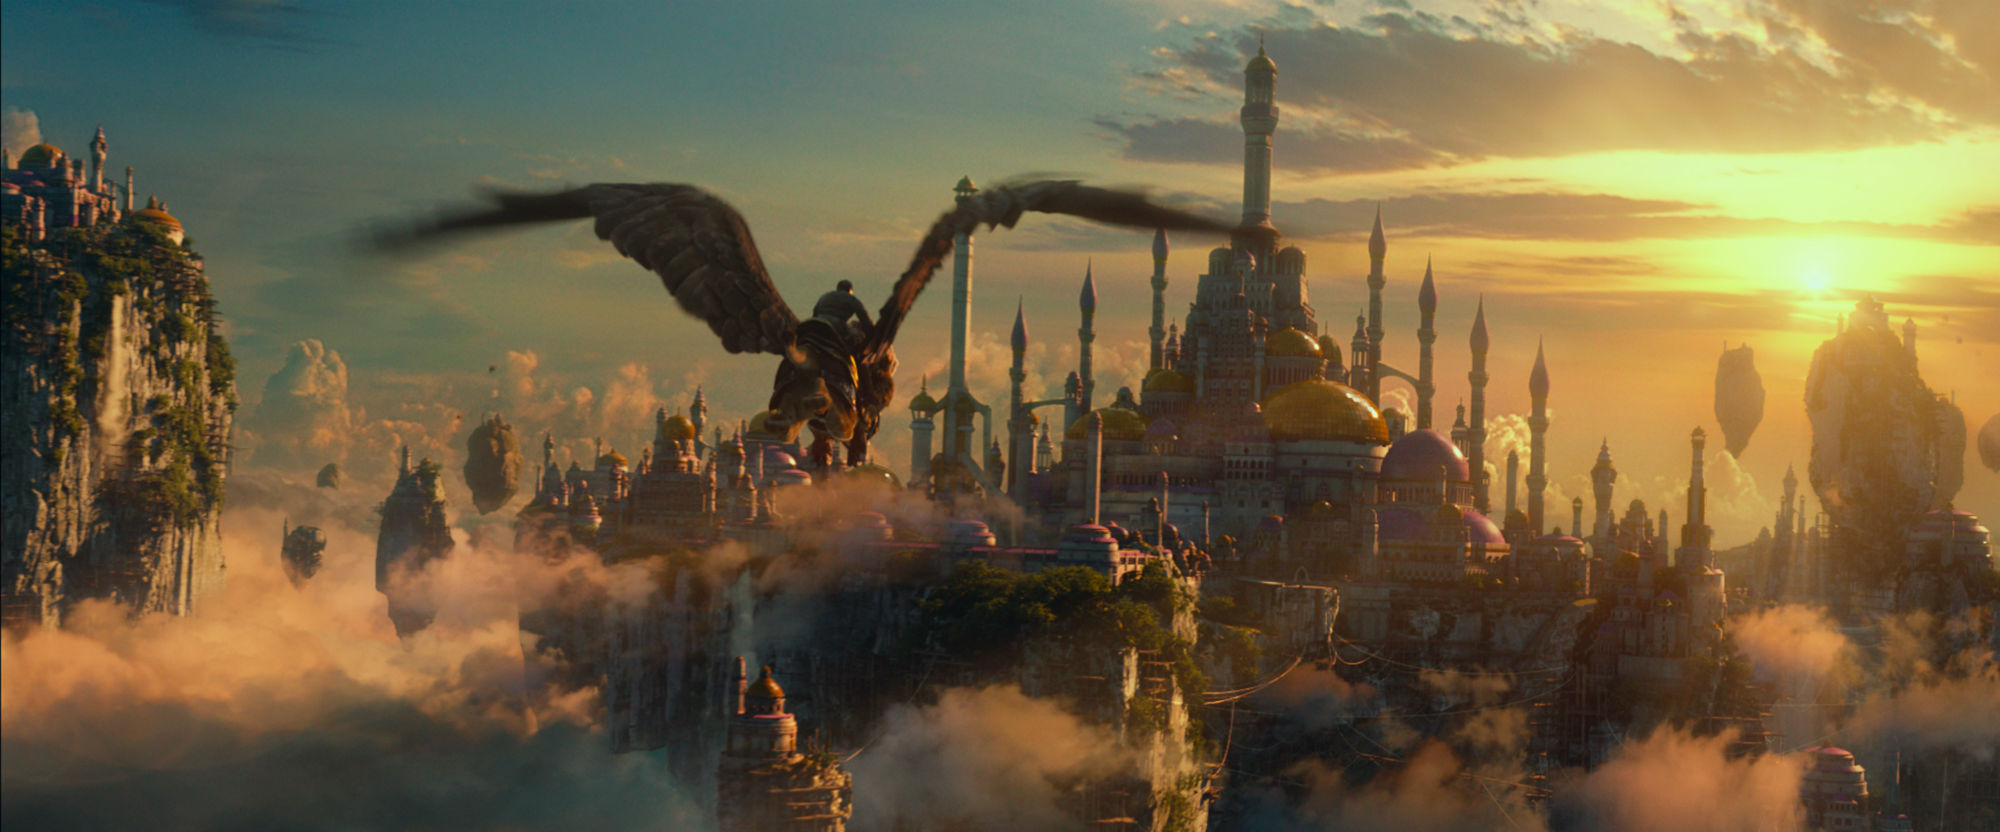 Warcraft Is Basically A Prequel To A Movie We May Never See